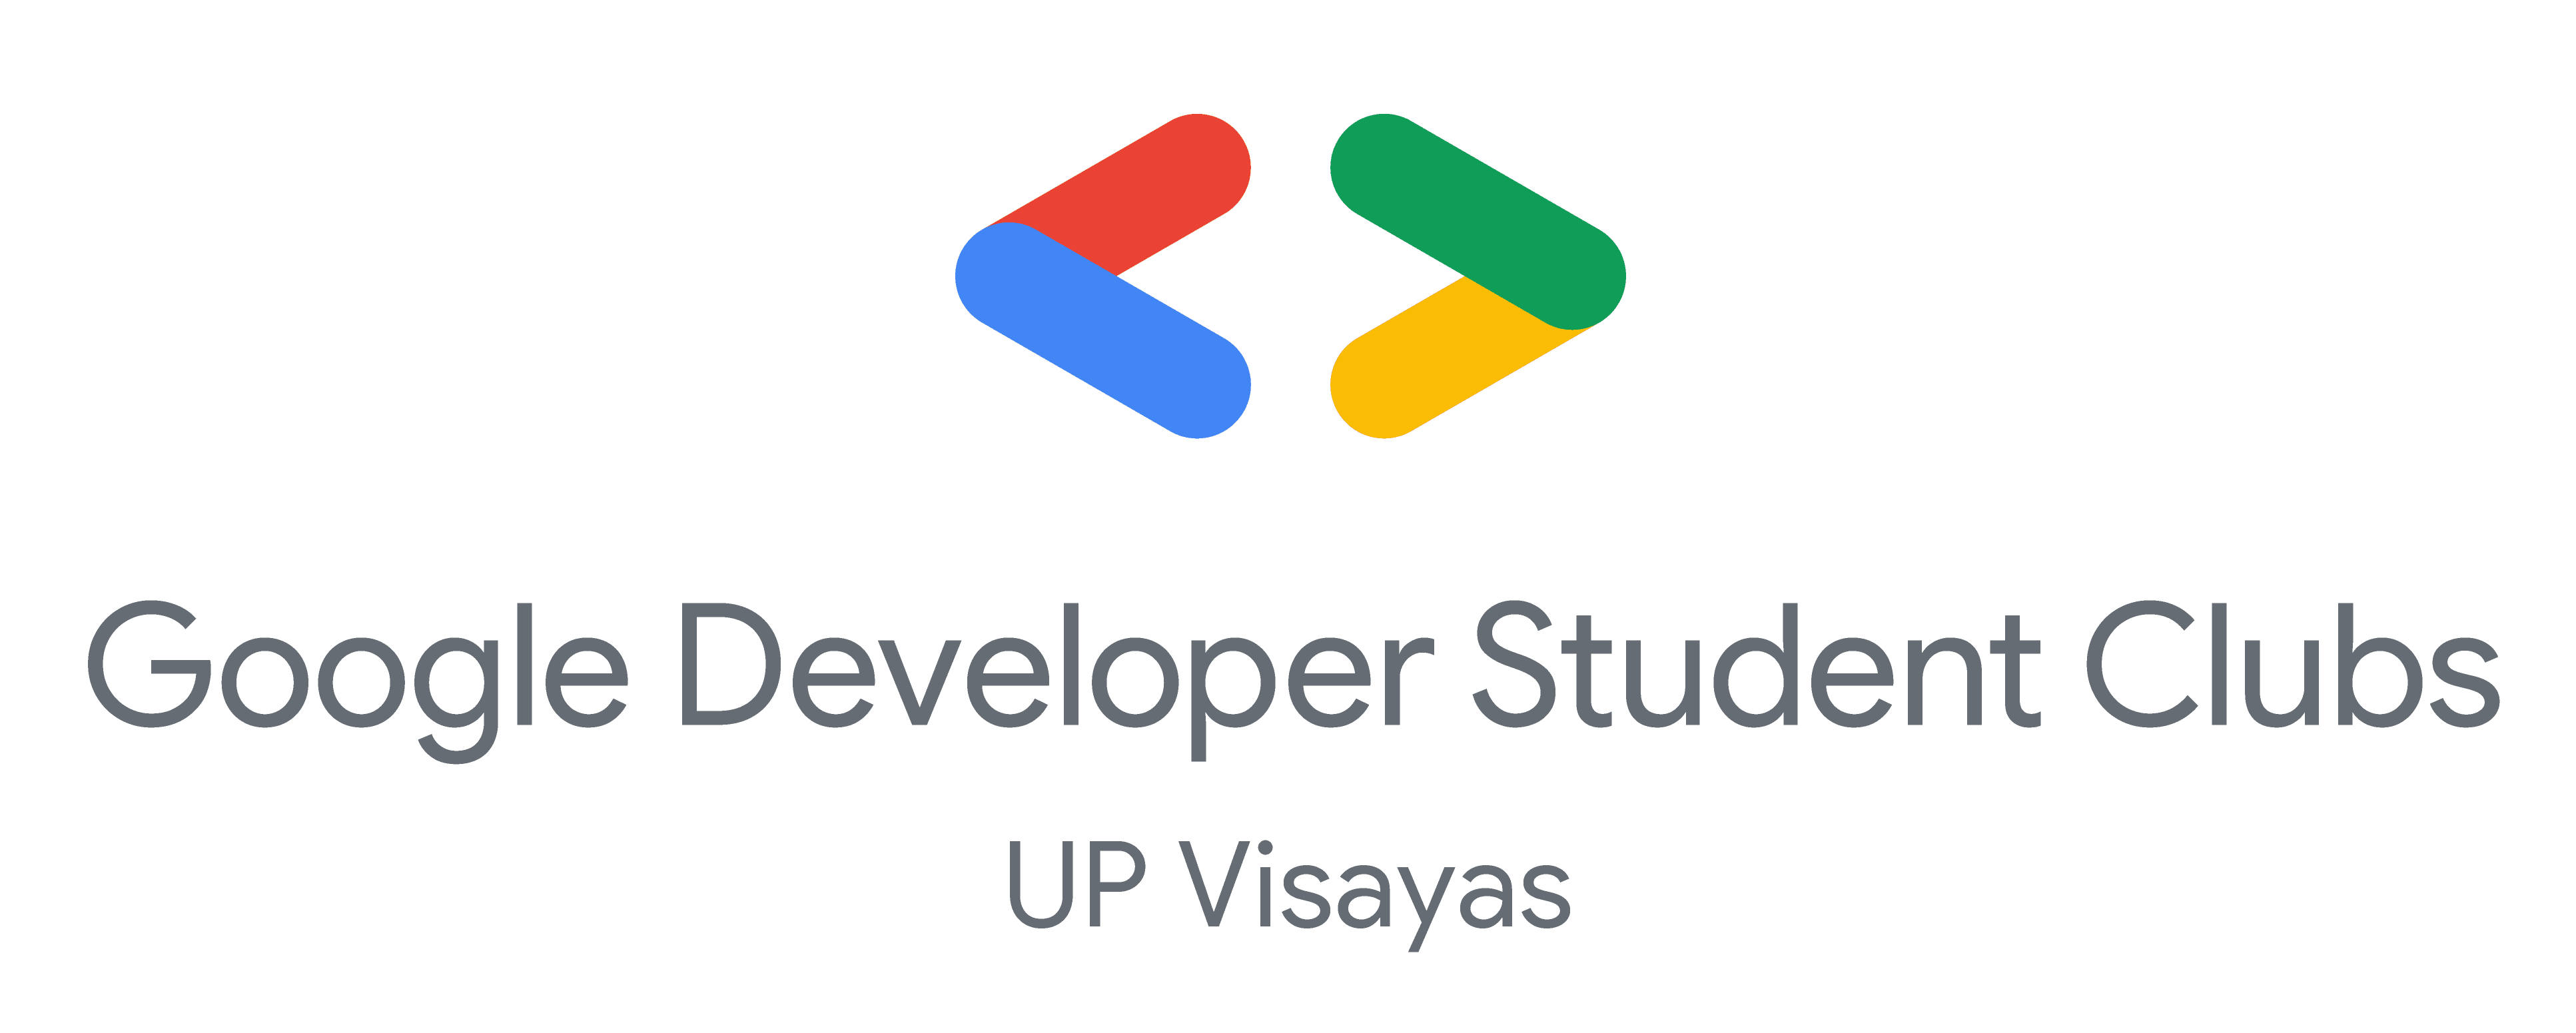 Google Developer Student Clubs University of the Philippines in the Visayas logo